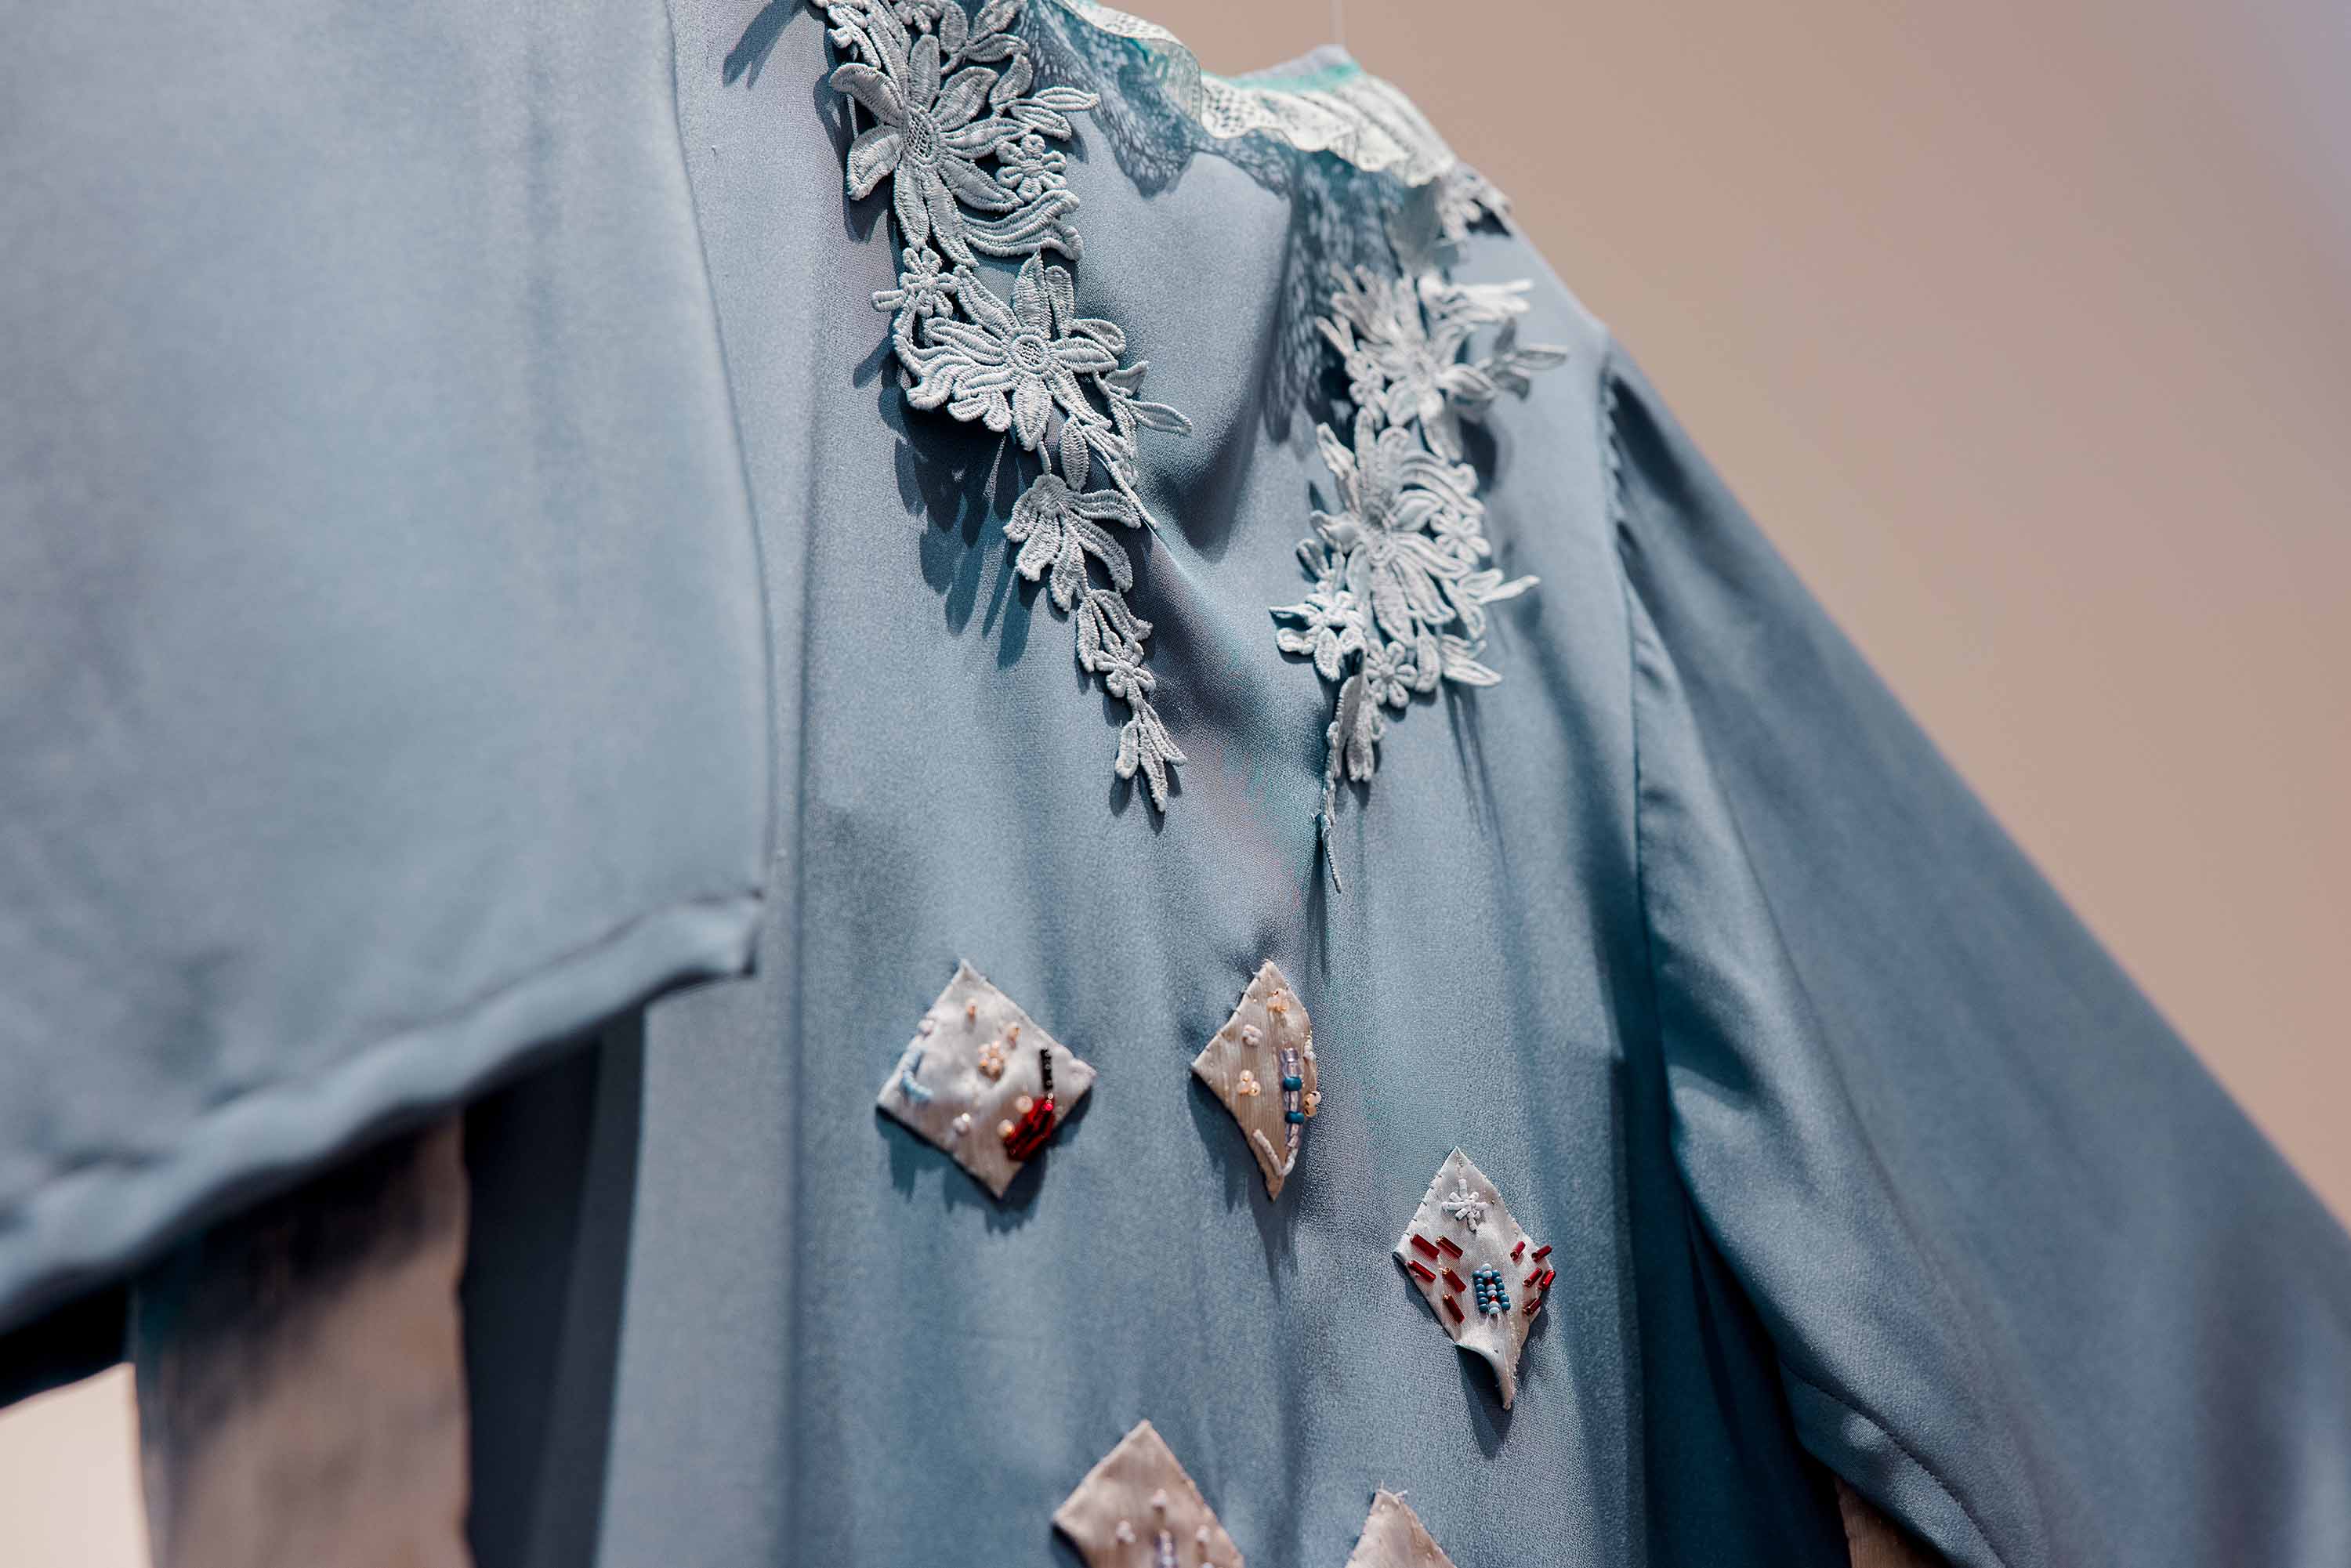 A close-up of a blue dress with lace trim and beaded appliques.